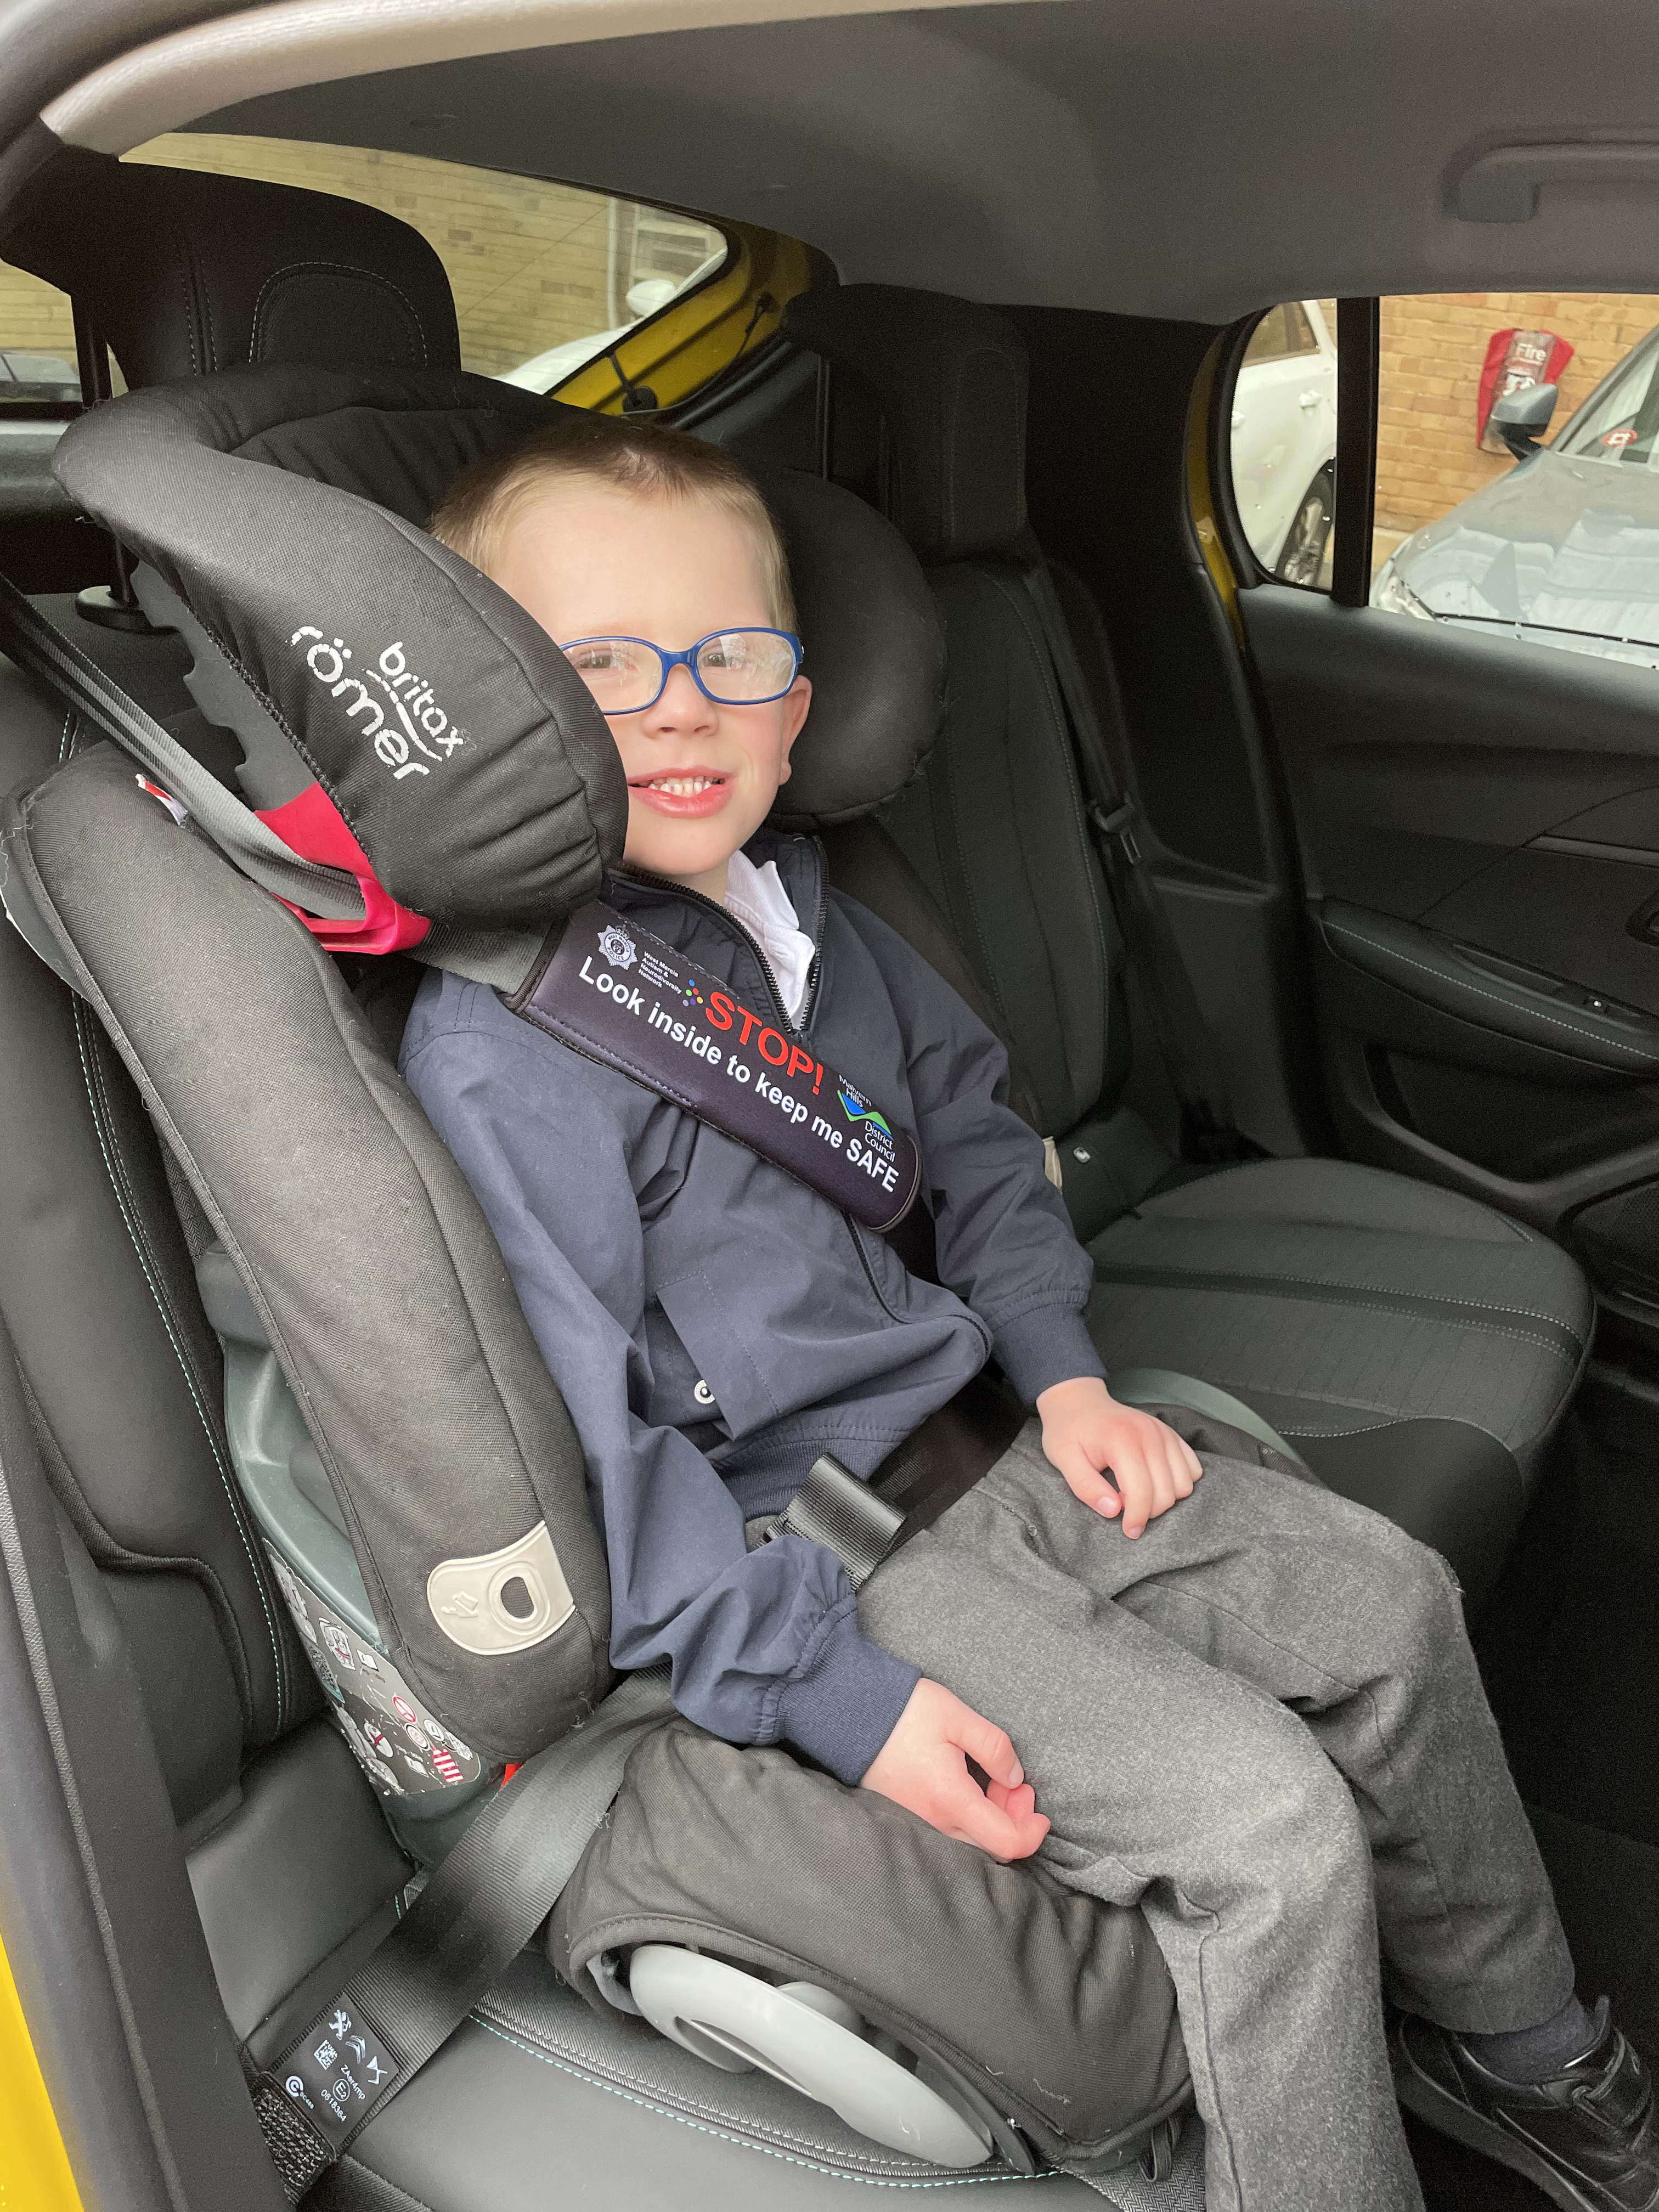 A little boy sitting in a car seat with a seatbelt around him. The seatbelt has a cover that says 'Look inside to keep me safe'.